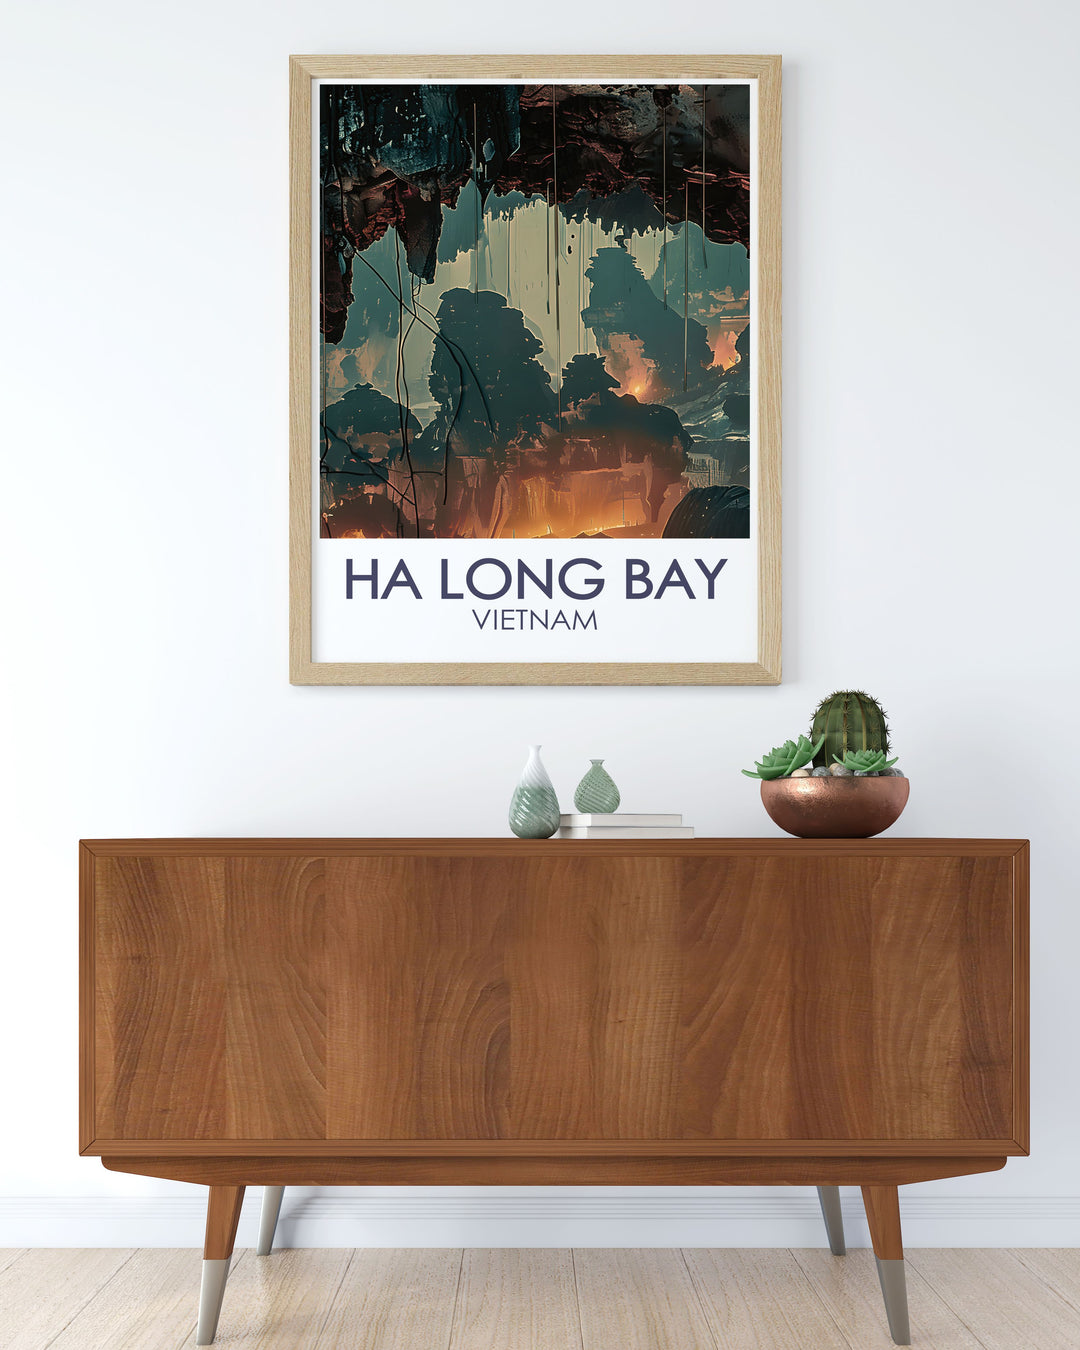 Showcasing the scenic beauty of Ha Long Bay, this travel poster captures the tranquil and majestic landscapes of Vietnams UNESCO World Heritage Site, bringing a piece of its wonder into your home.